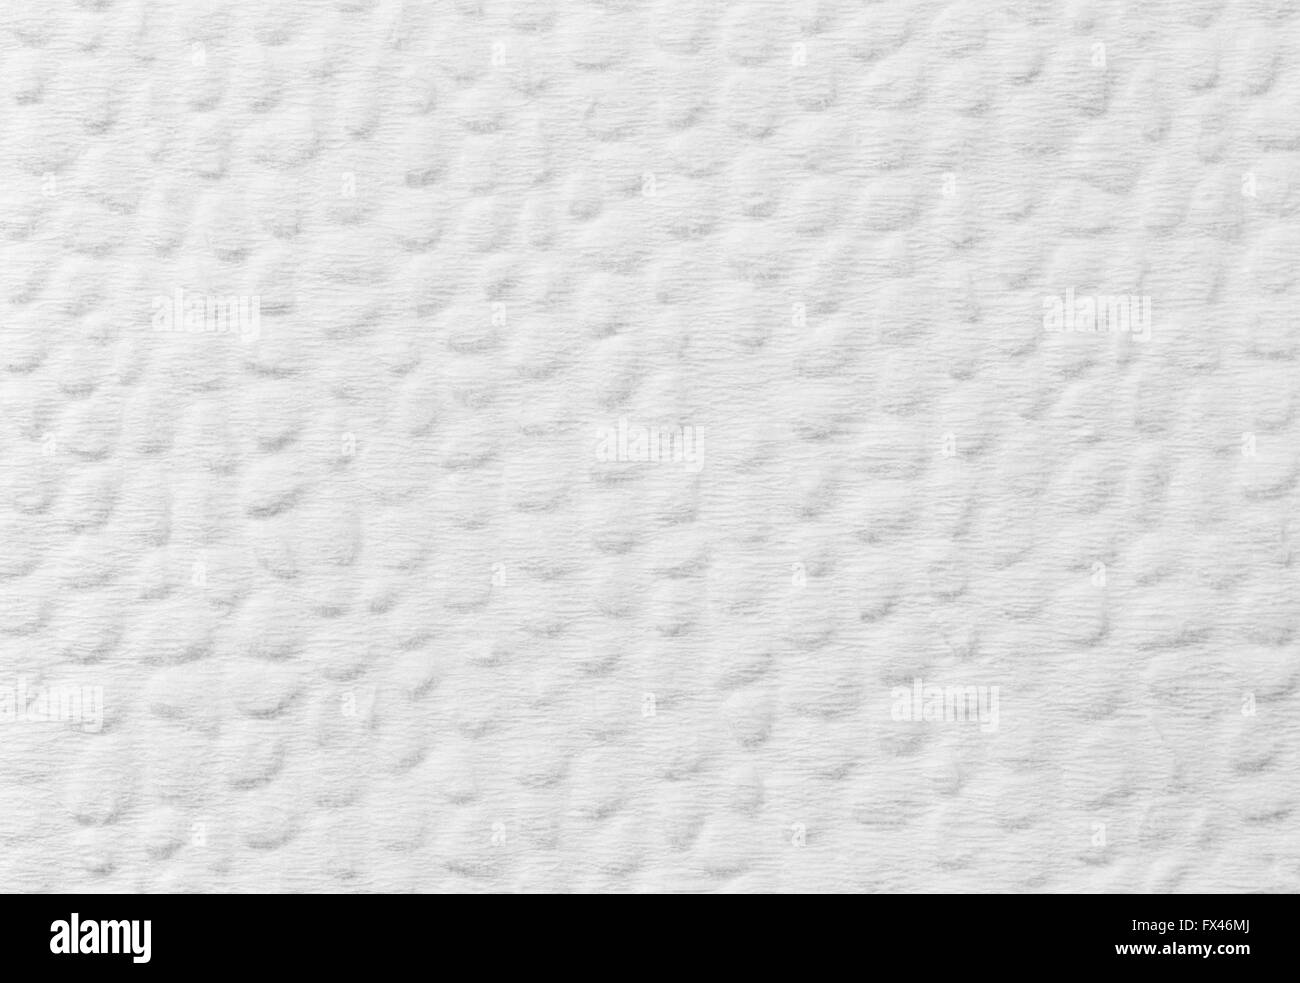 Natural paper texture black&white background with particles for design-use Stock Photo